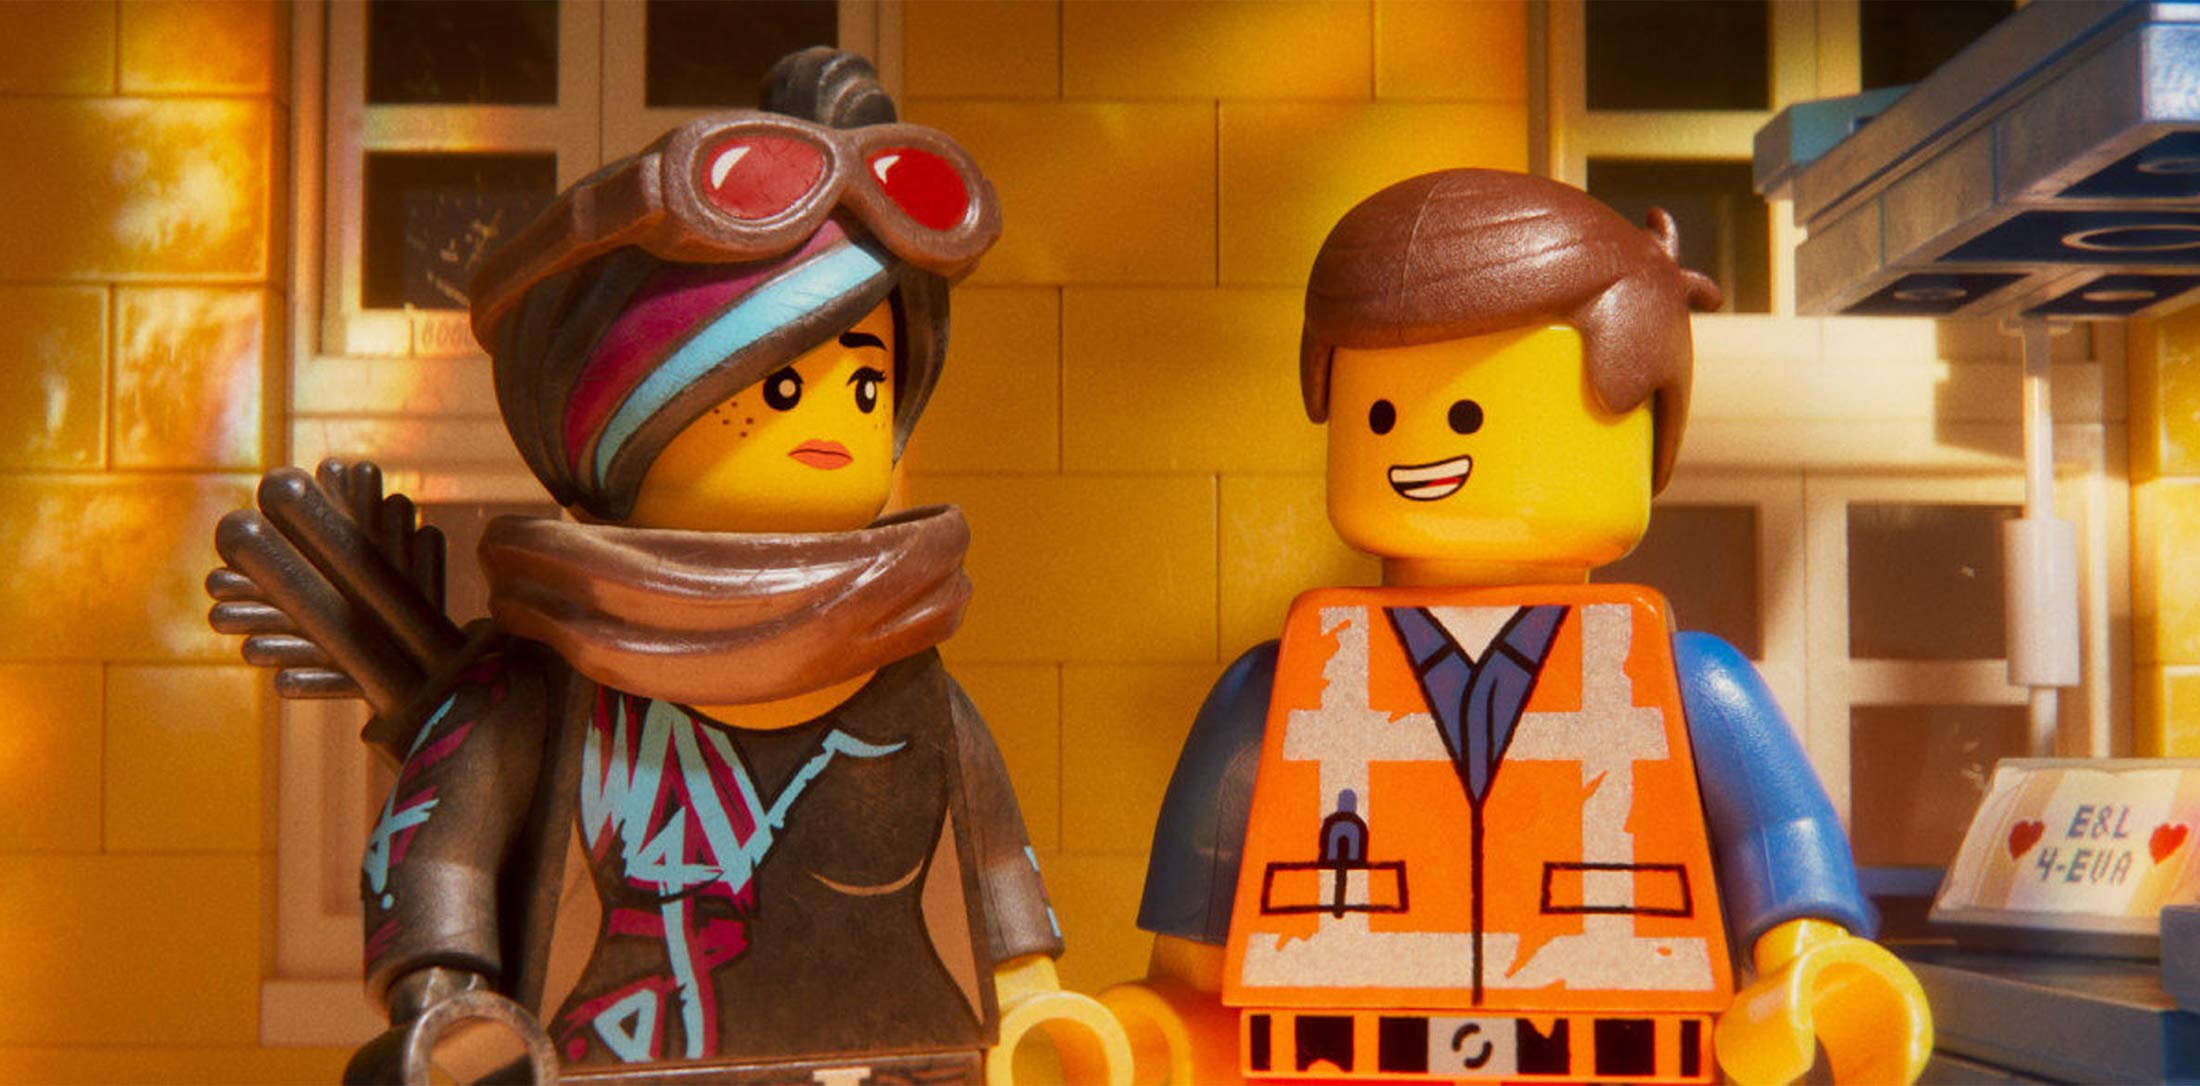 Faktura Nedsænkning Tether Lego Movie 2' to Test Whether Bricks Still Click With Kids - Bloomberg